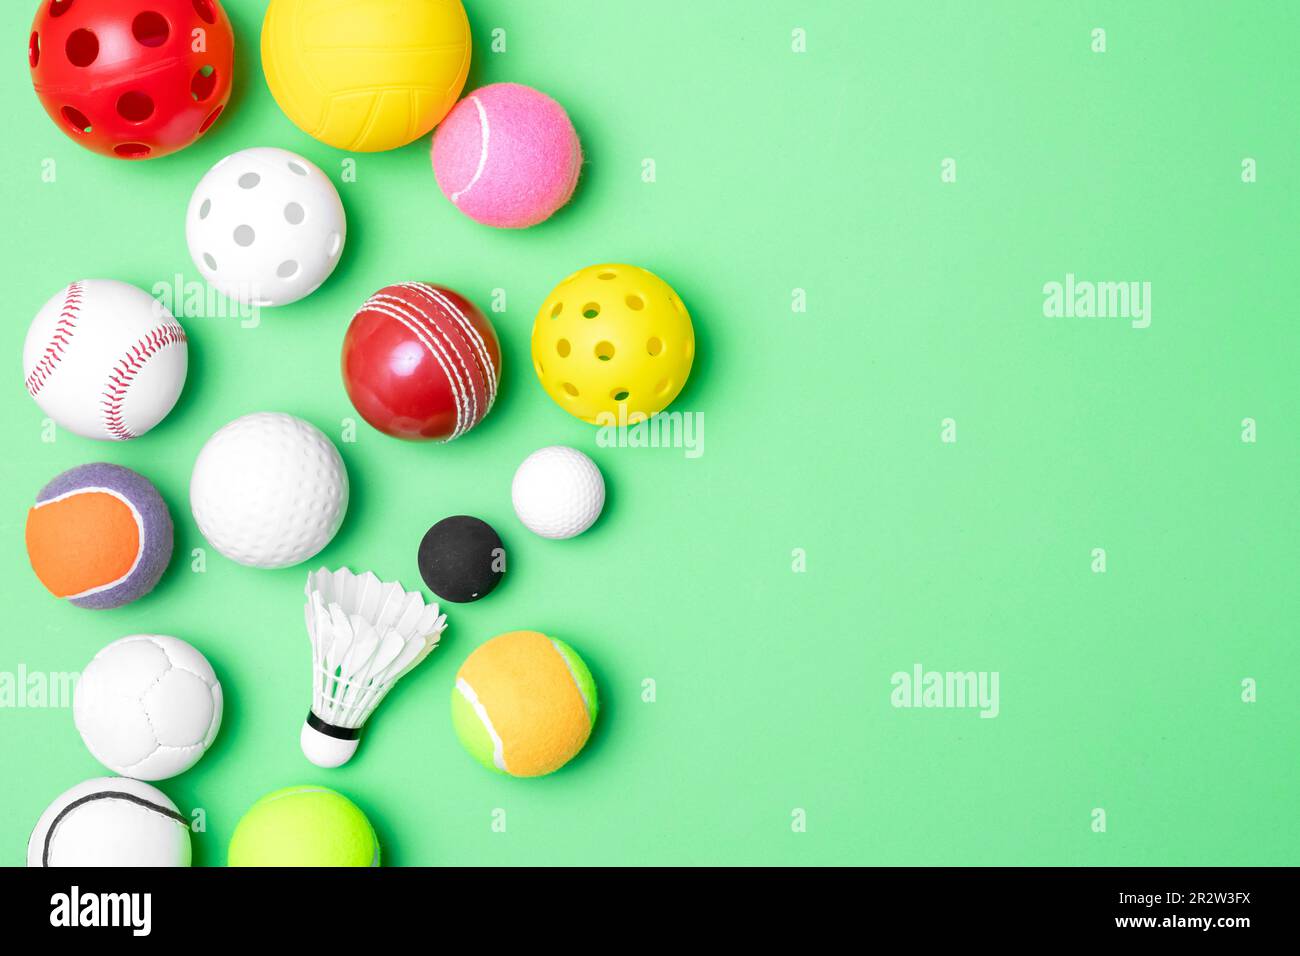 Sports equipment, balls on green background. Horizontal education and  ball sport poster, greeting cards, headers, website Stock Photo